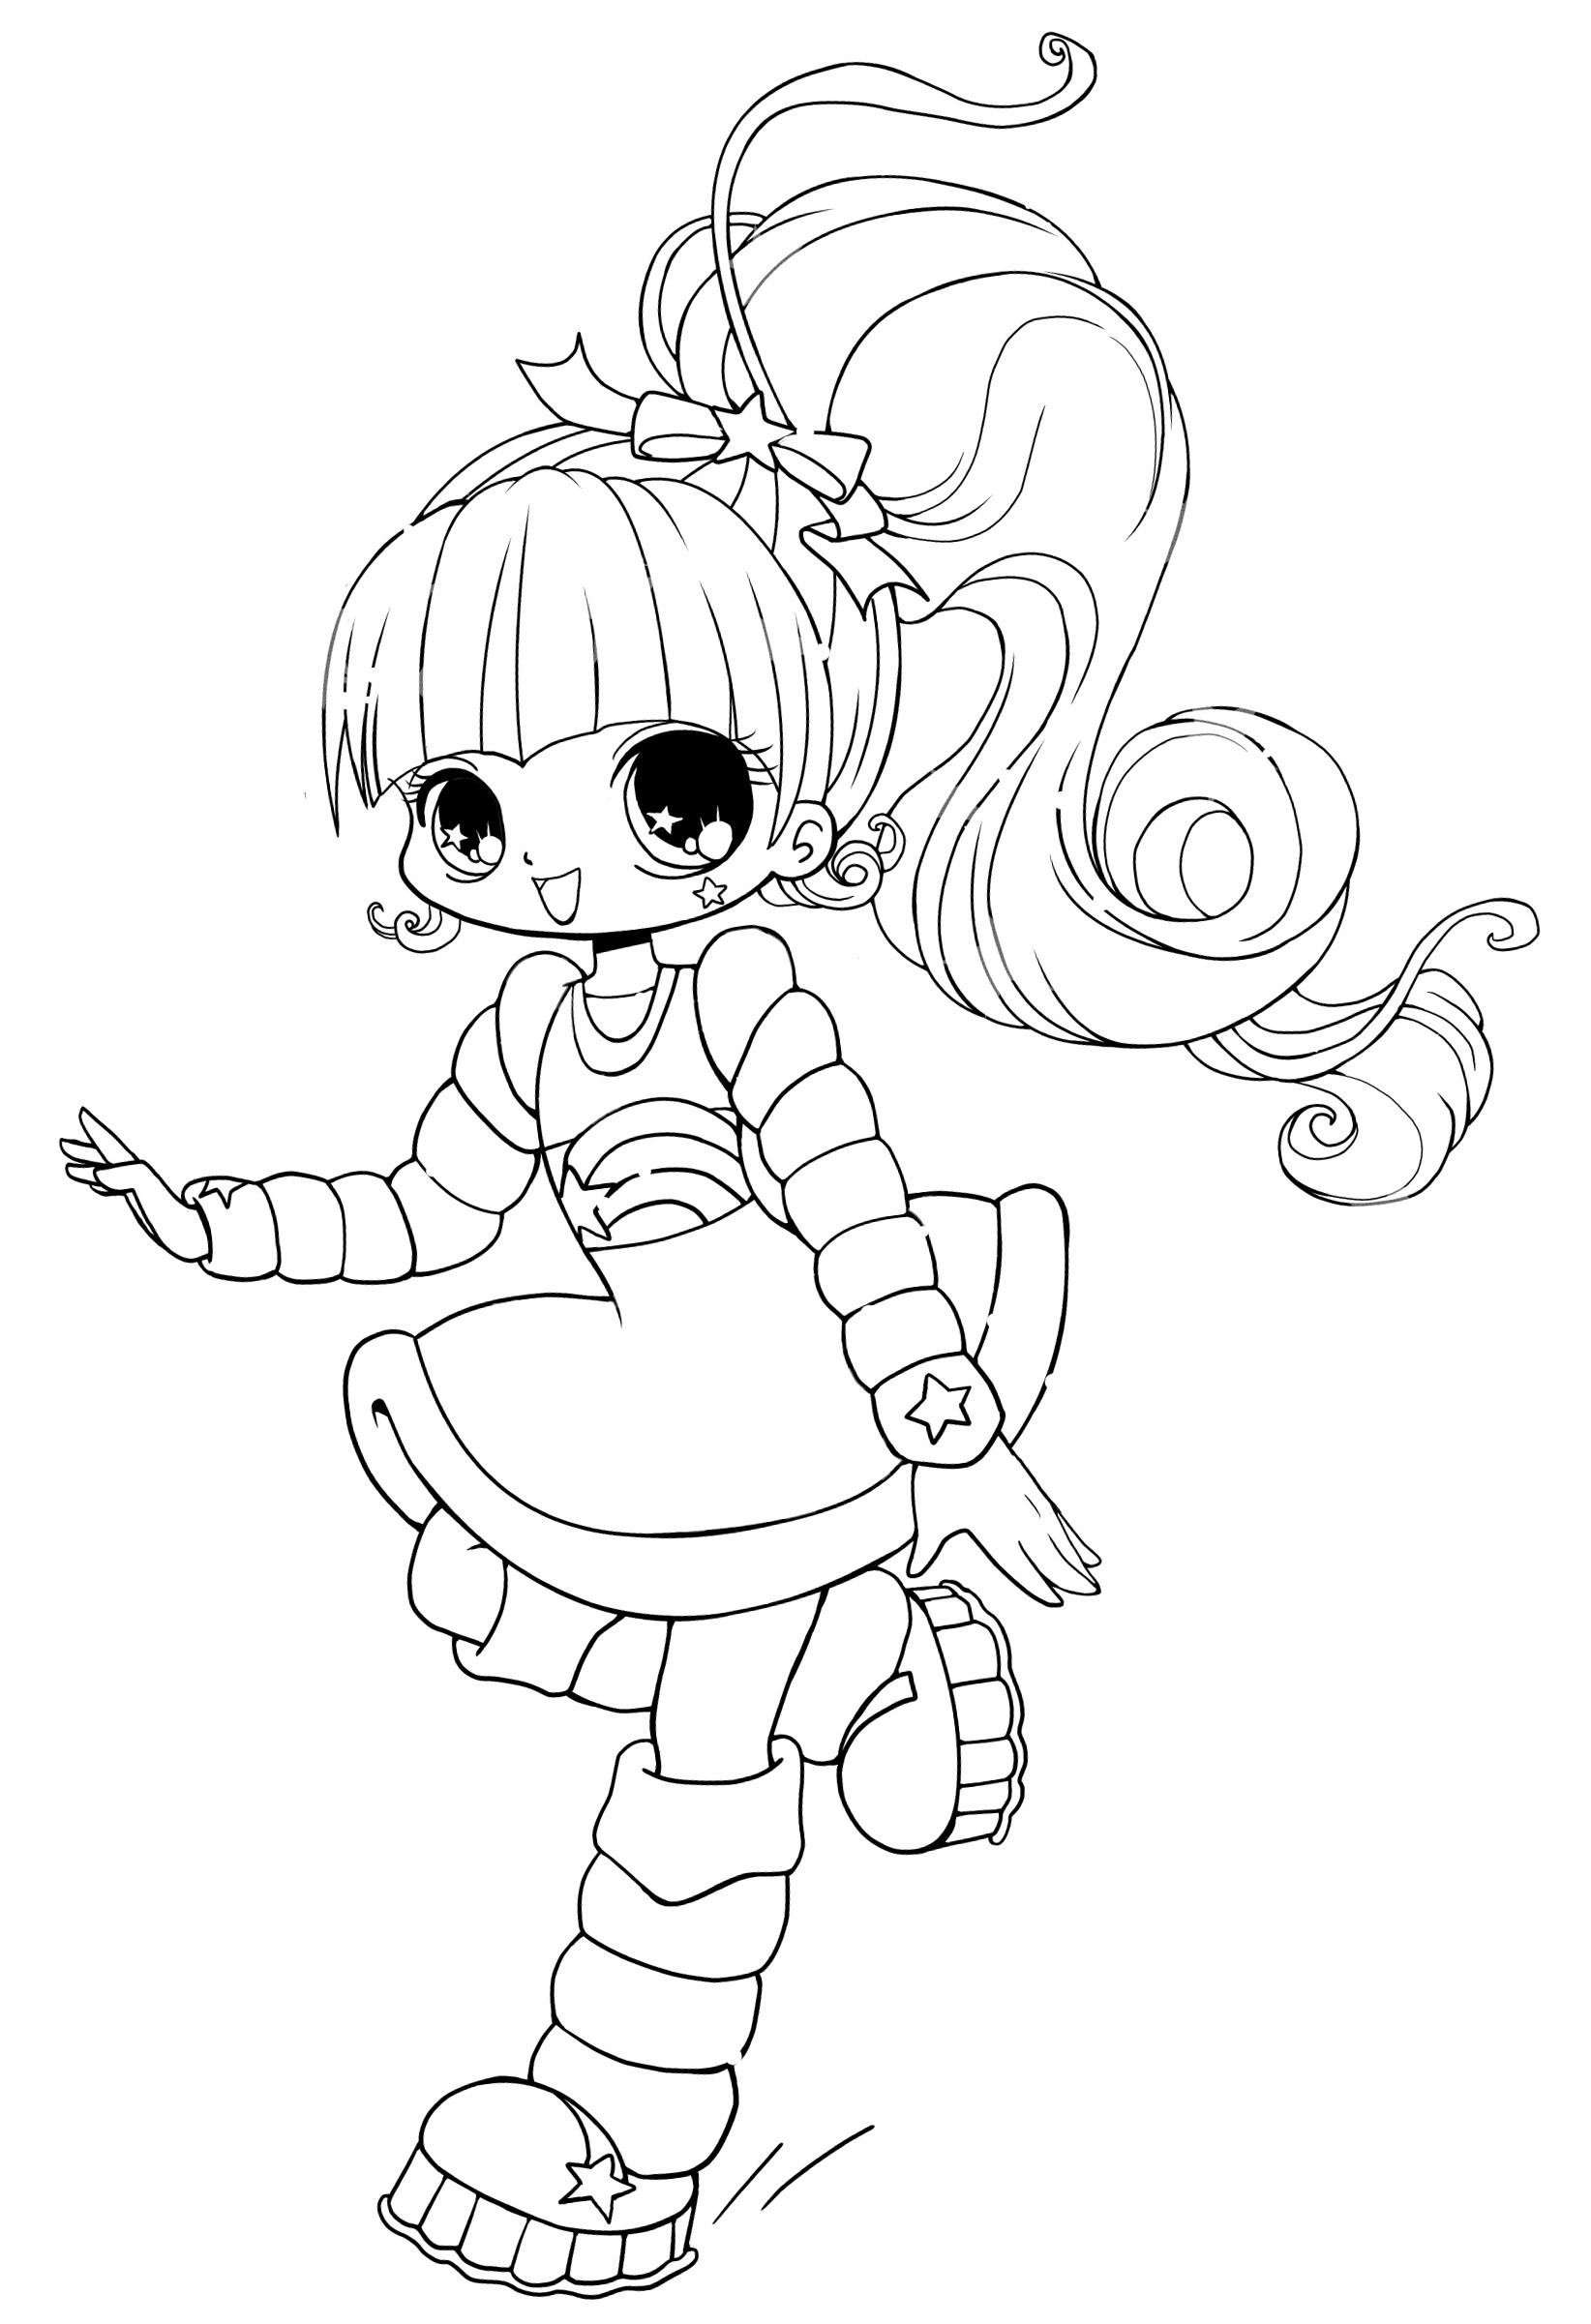 Kawaii Girls Coloring Pages
 Free Printable Chibi Coloring Pages For Kids